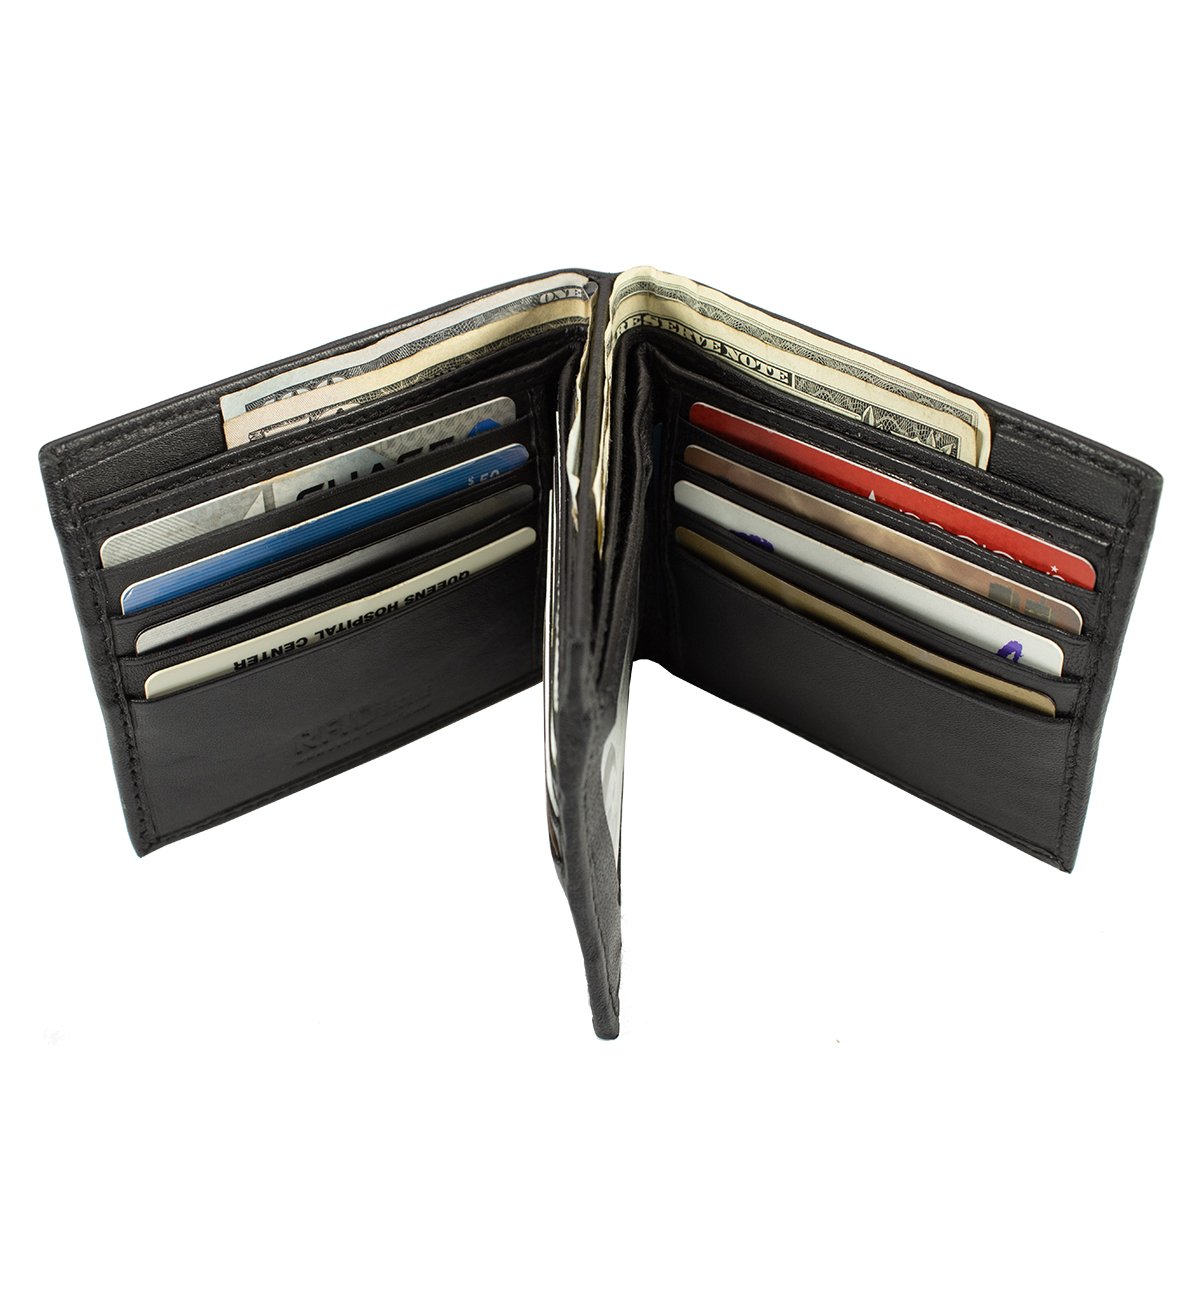 Lambskin Bifold Wallet with 4 Currency Compartments, RFID Blocking Genuine Leather – #LW-42 RF